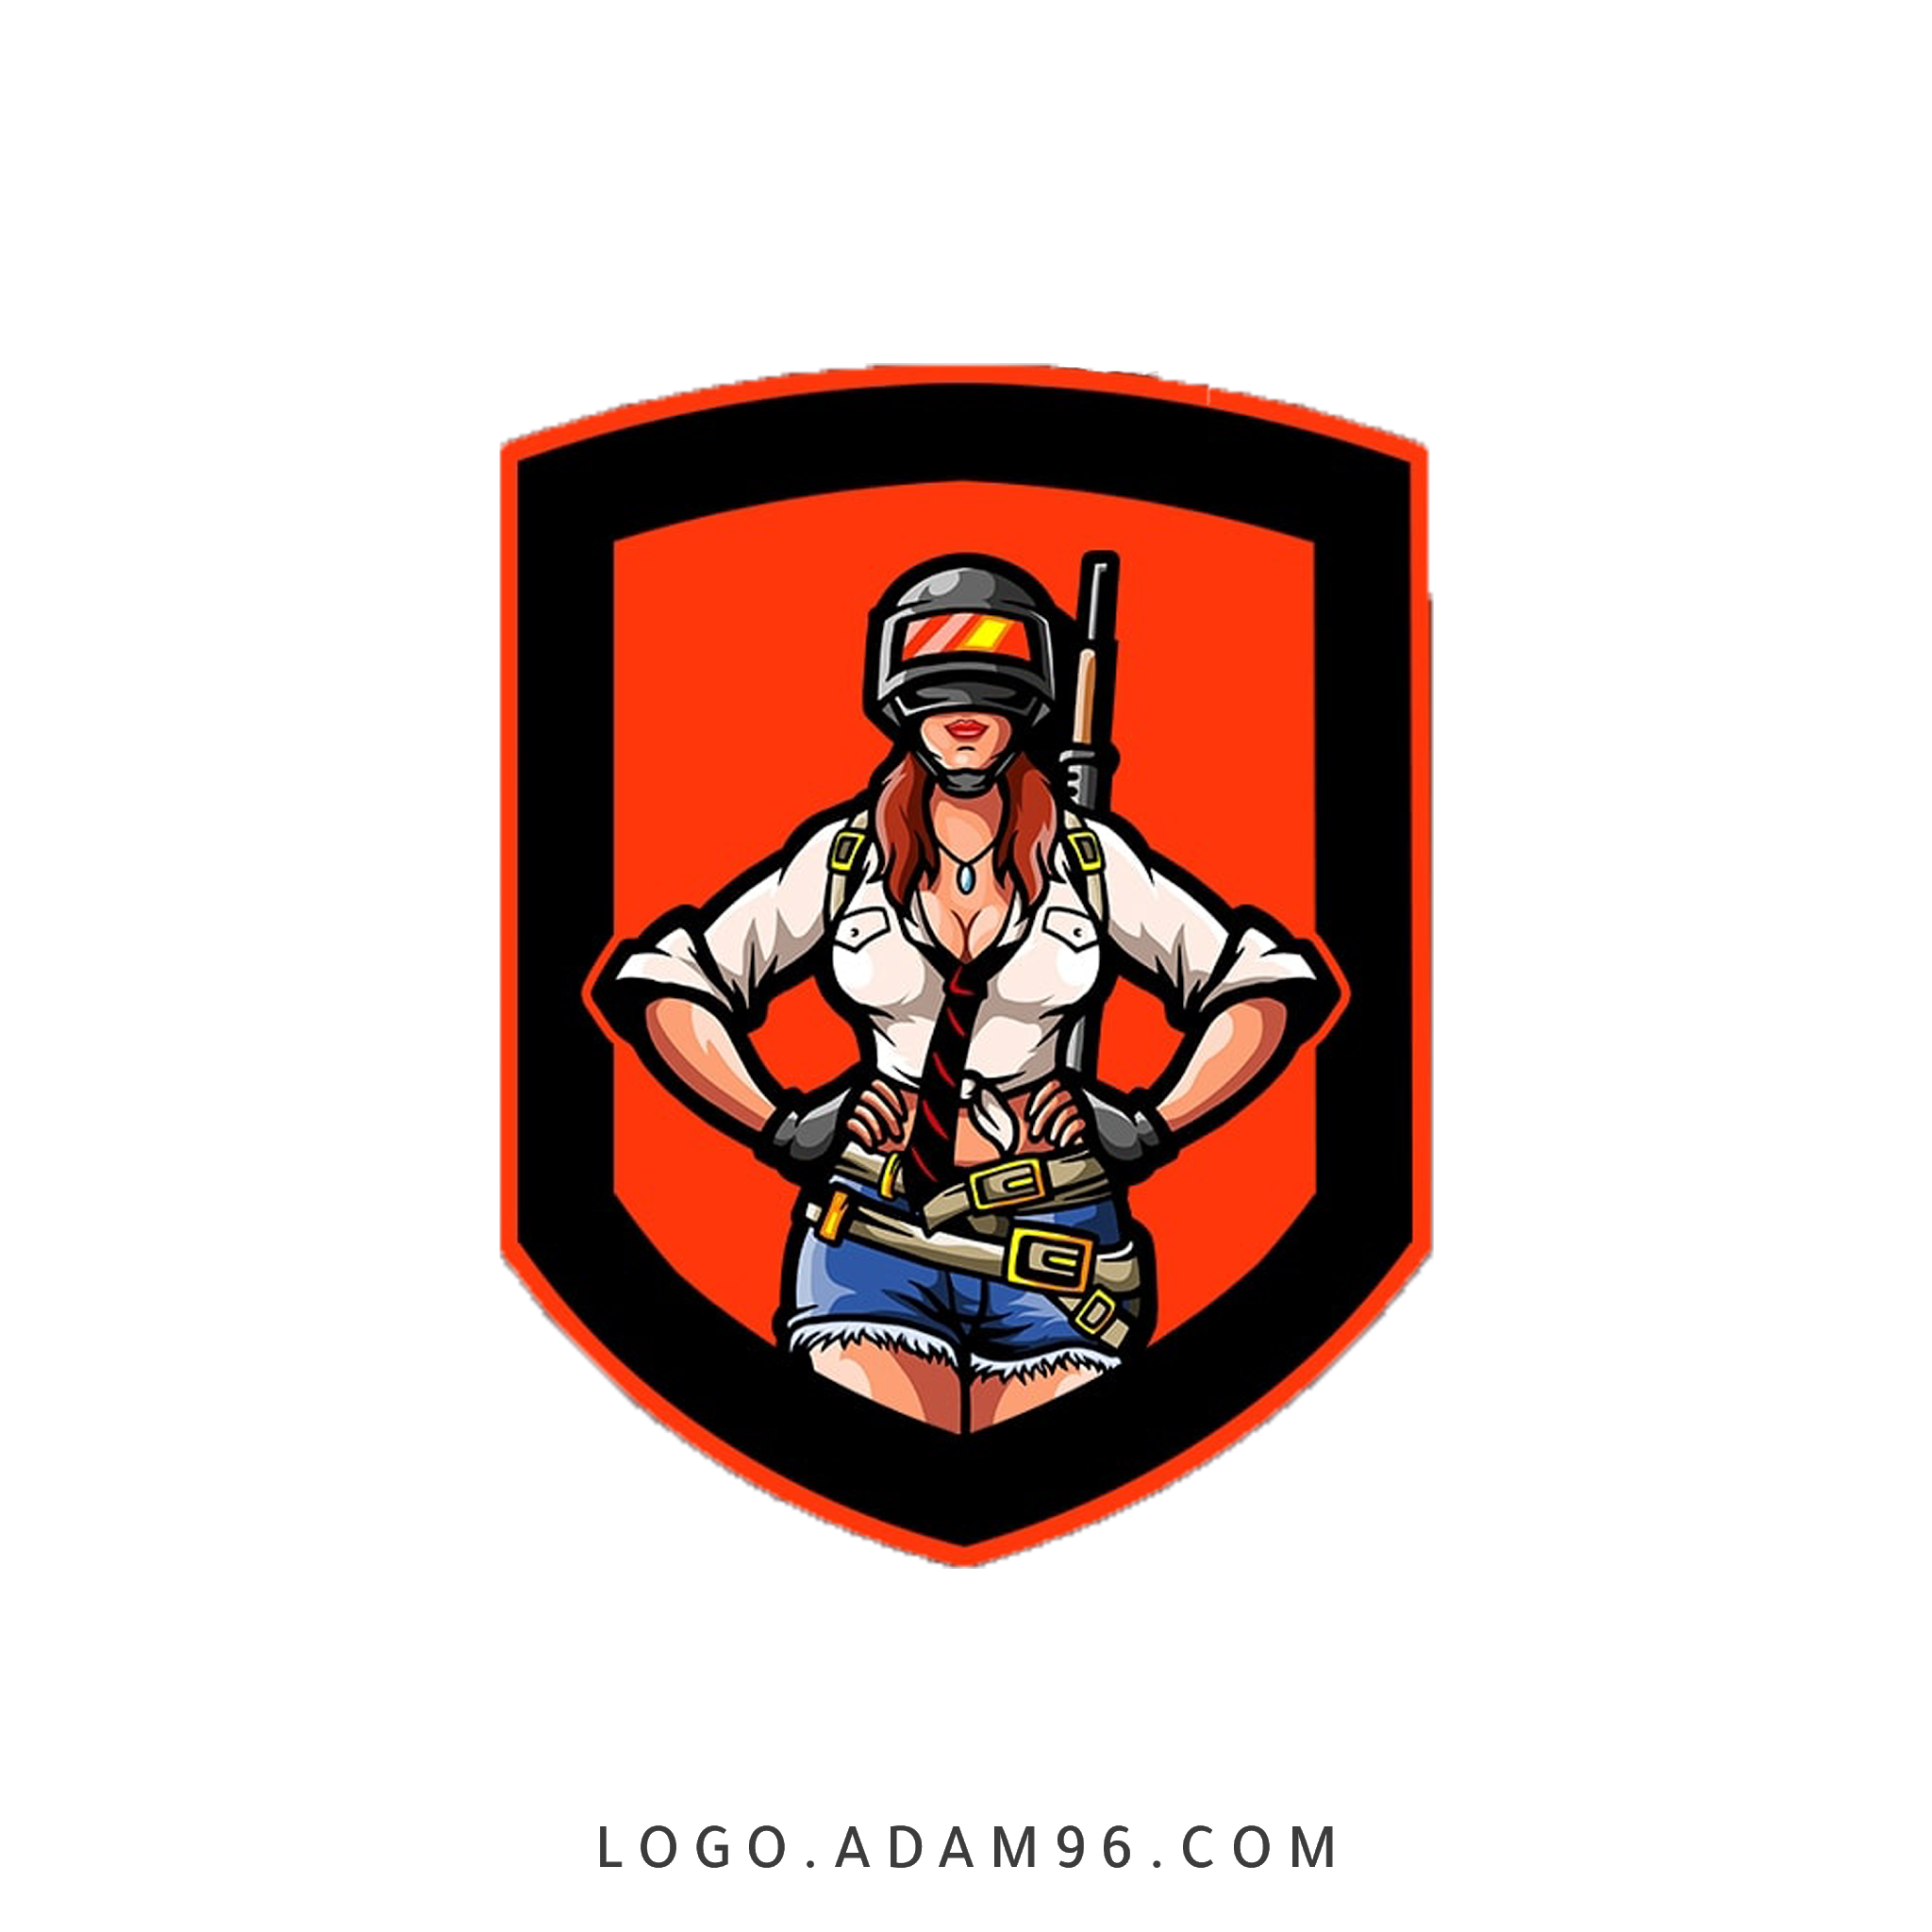 Download The Best PUBG Logos For Free